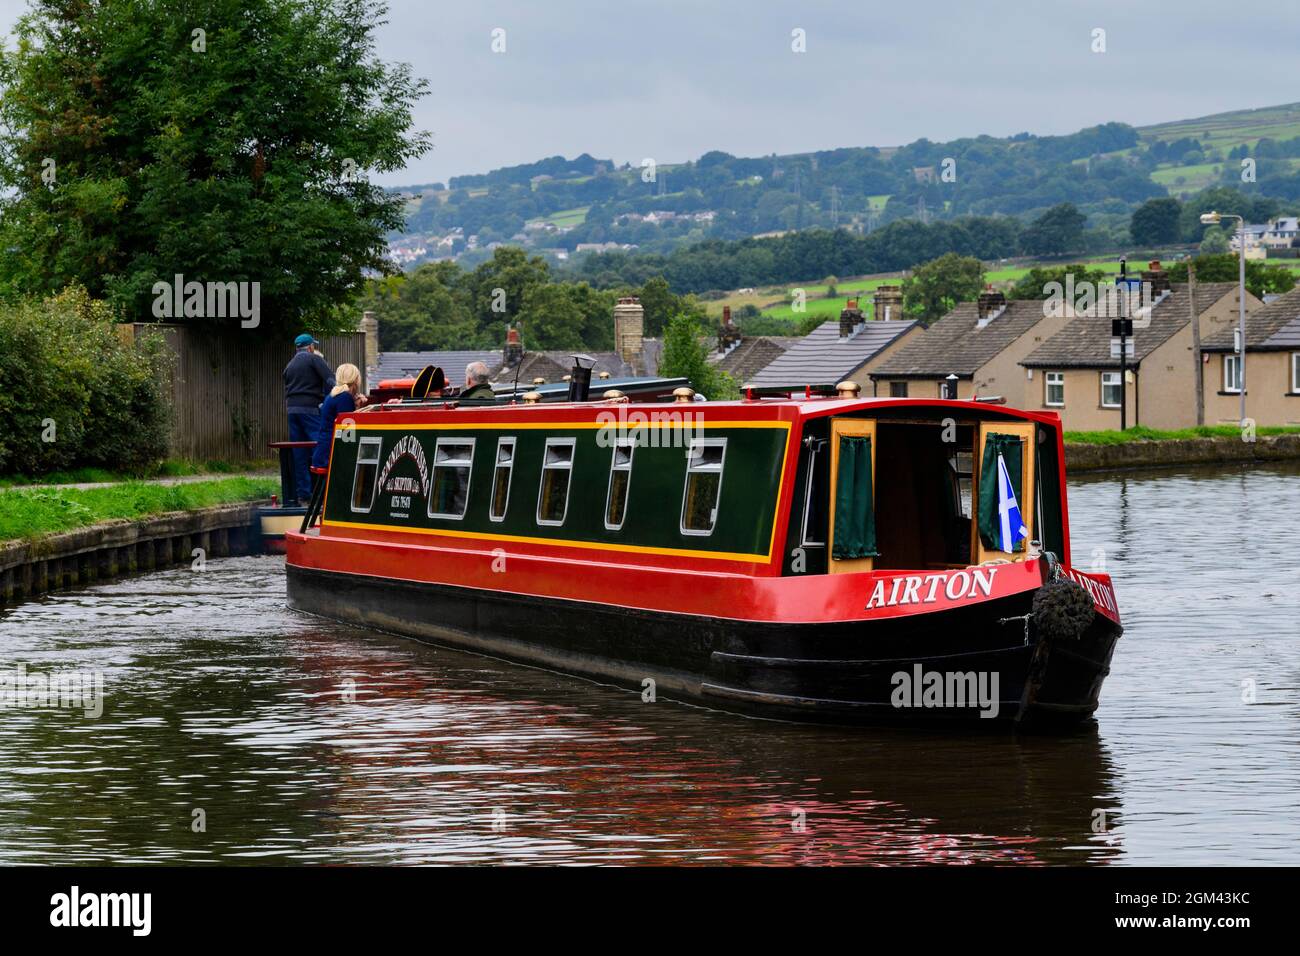 Hired red & green narrowboat sailing & travelling (casting-off) on semi-urban waterway, couple aboard - Leeds Liverpool Canal, Bingley, England, UK. Stock Photo